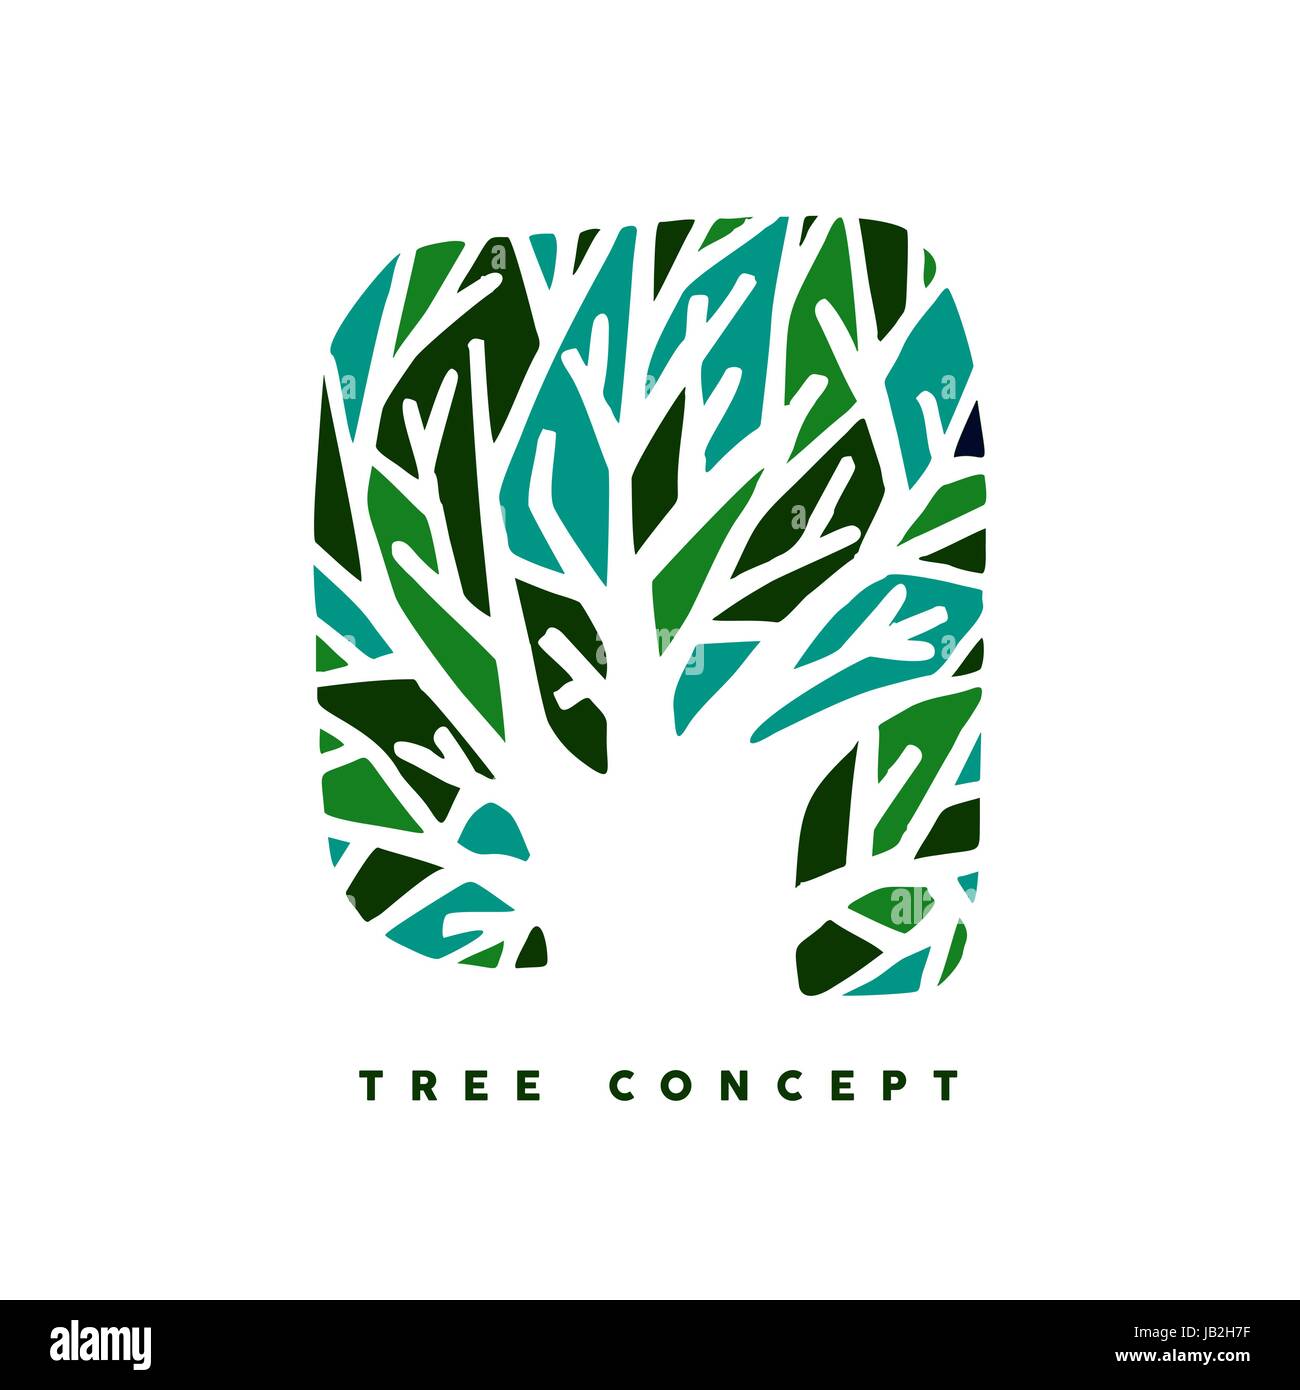 Green tree concept design, abstract illustration art for environment care or nature help project. EPS10 vector. Stock Vector